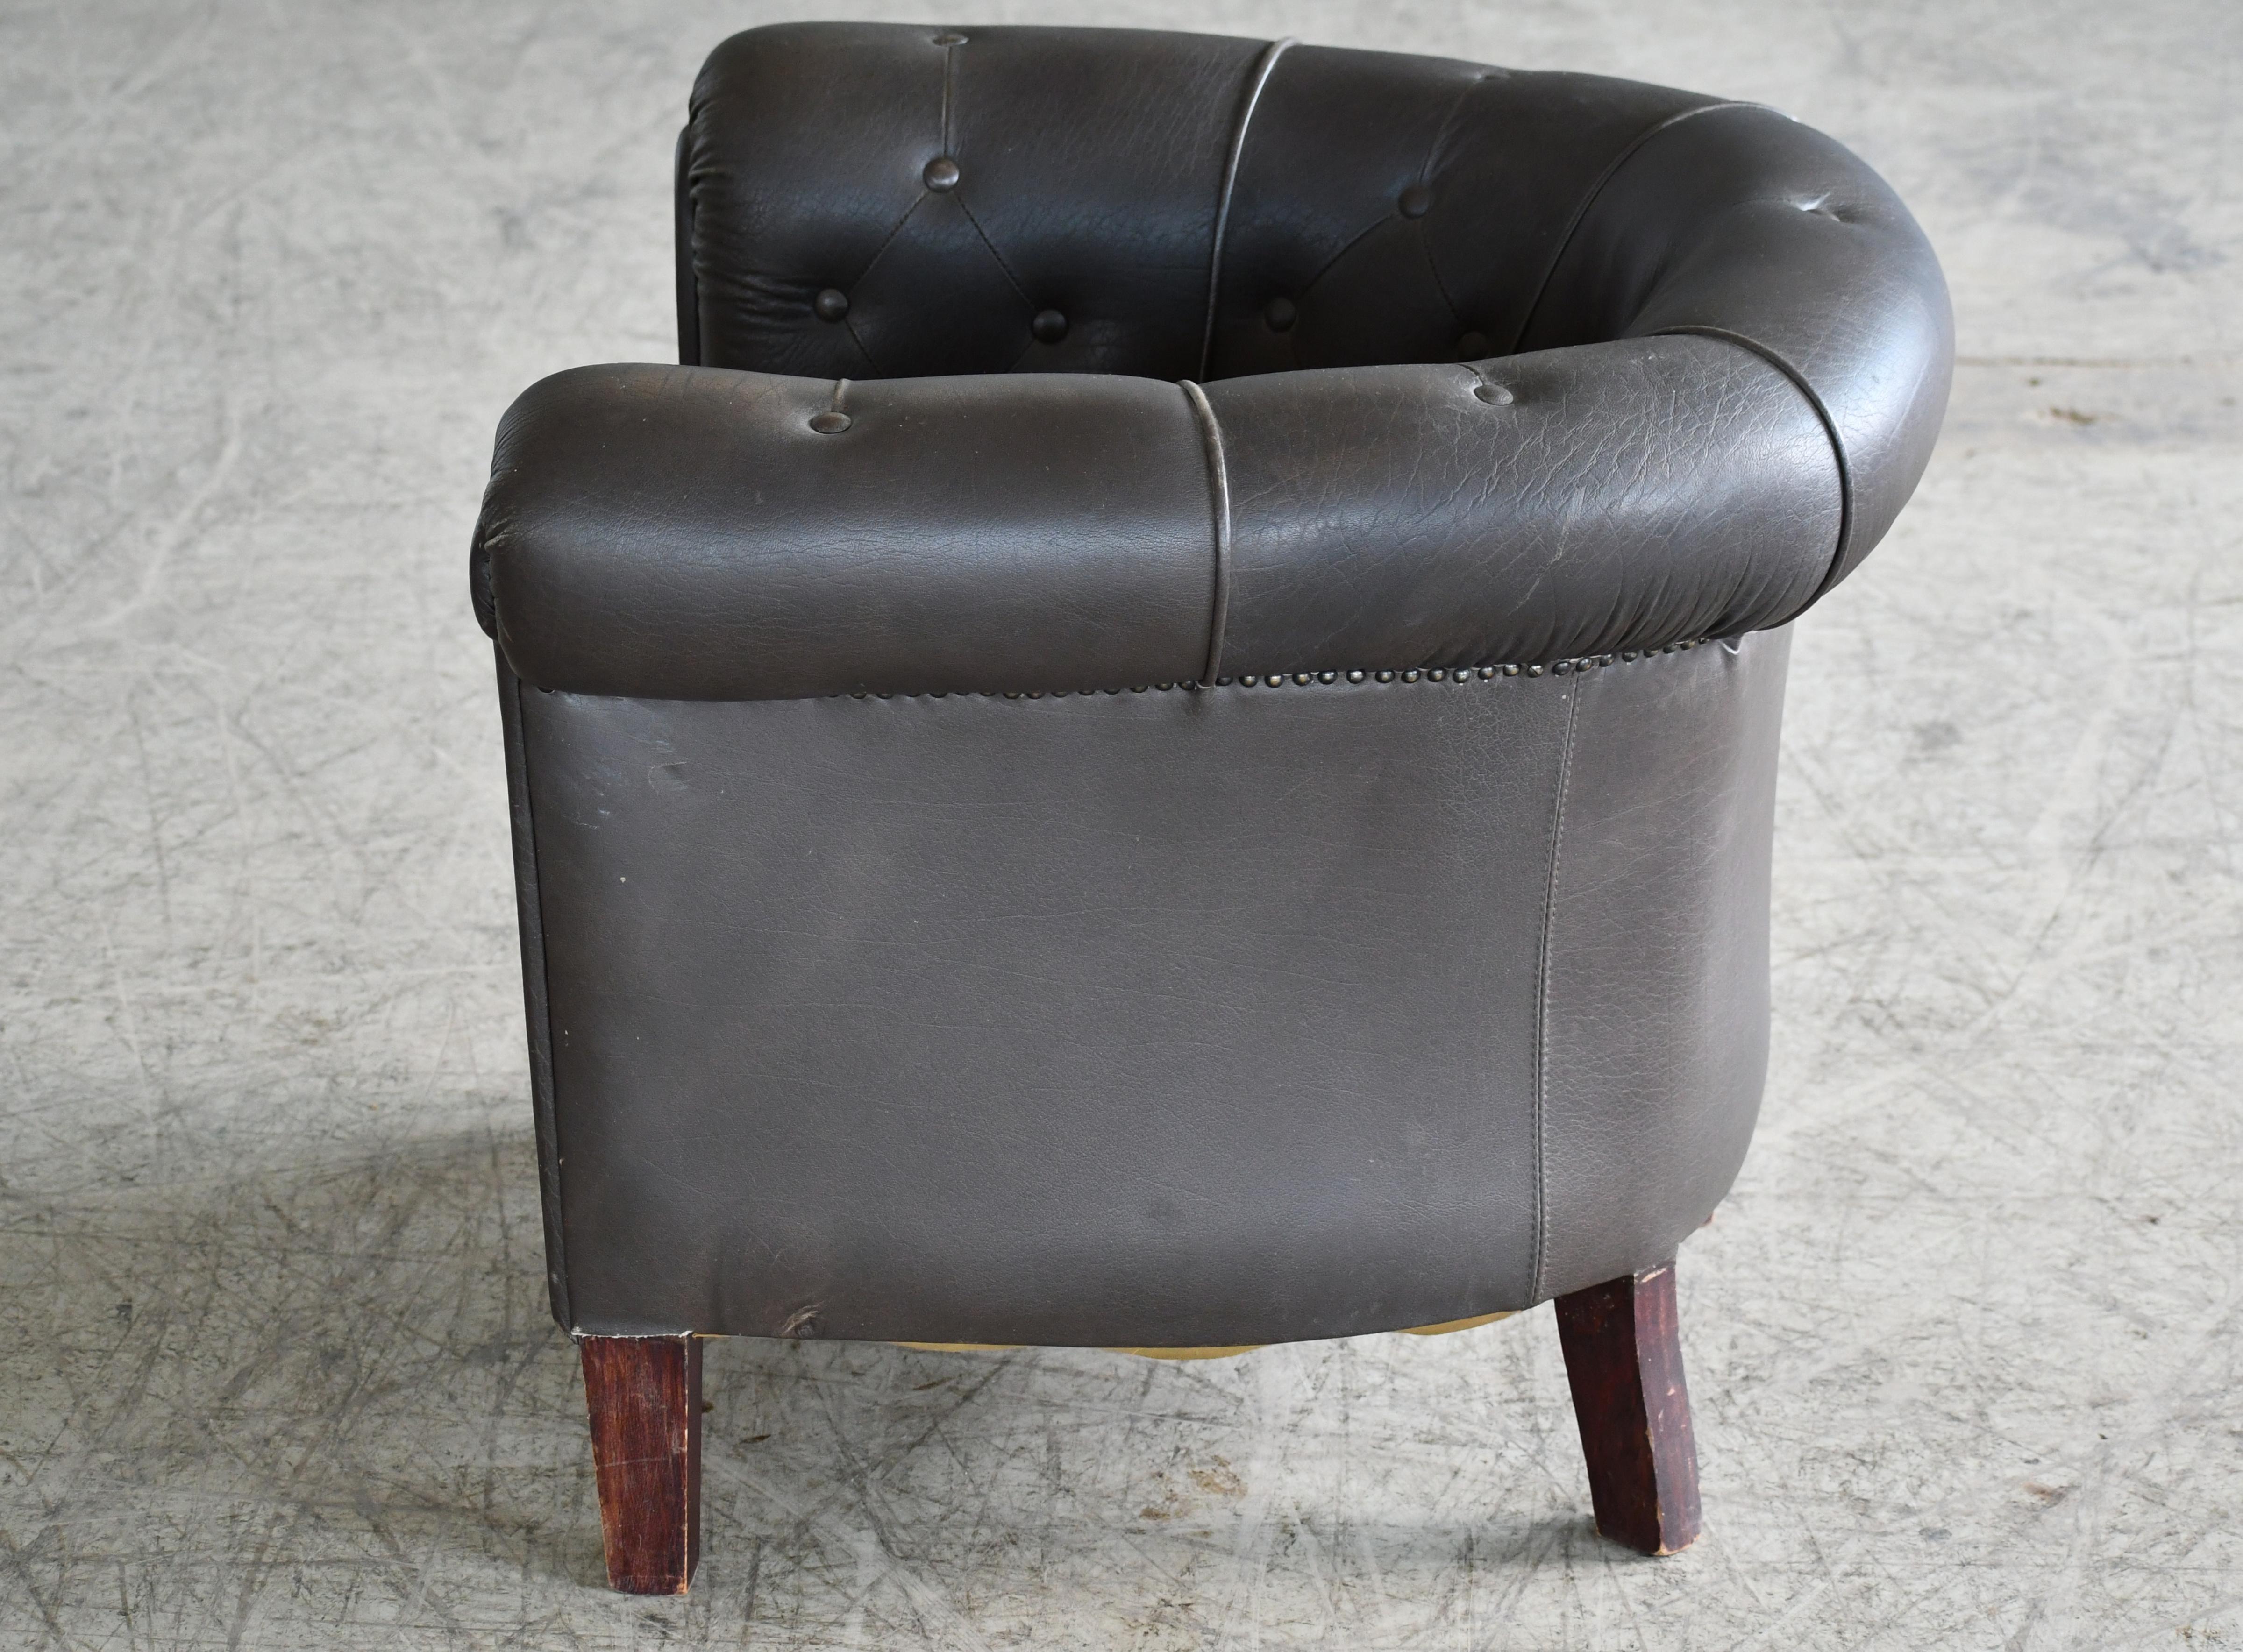 Mid-20th Century Danish Chesterfield Style Tufted Lounge Chair in Charcoal Leather, circa 1950 For Sale